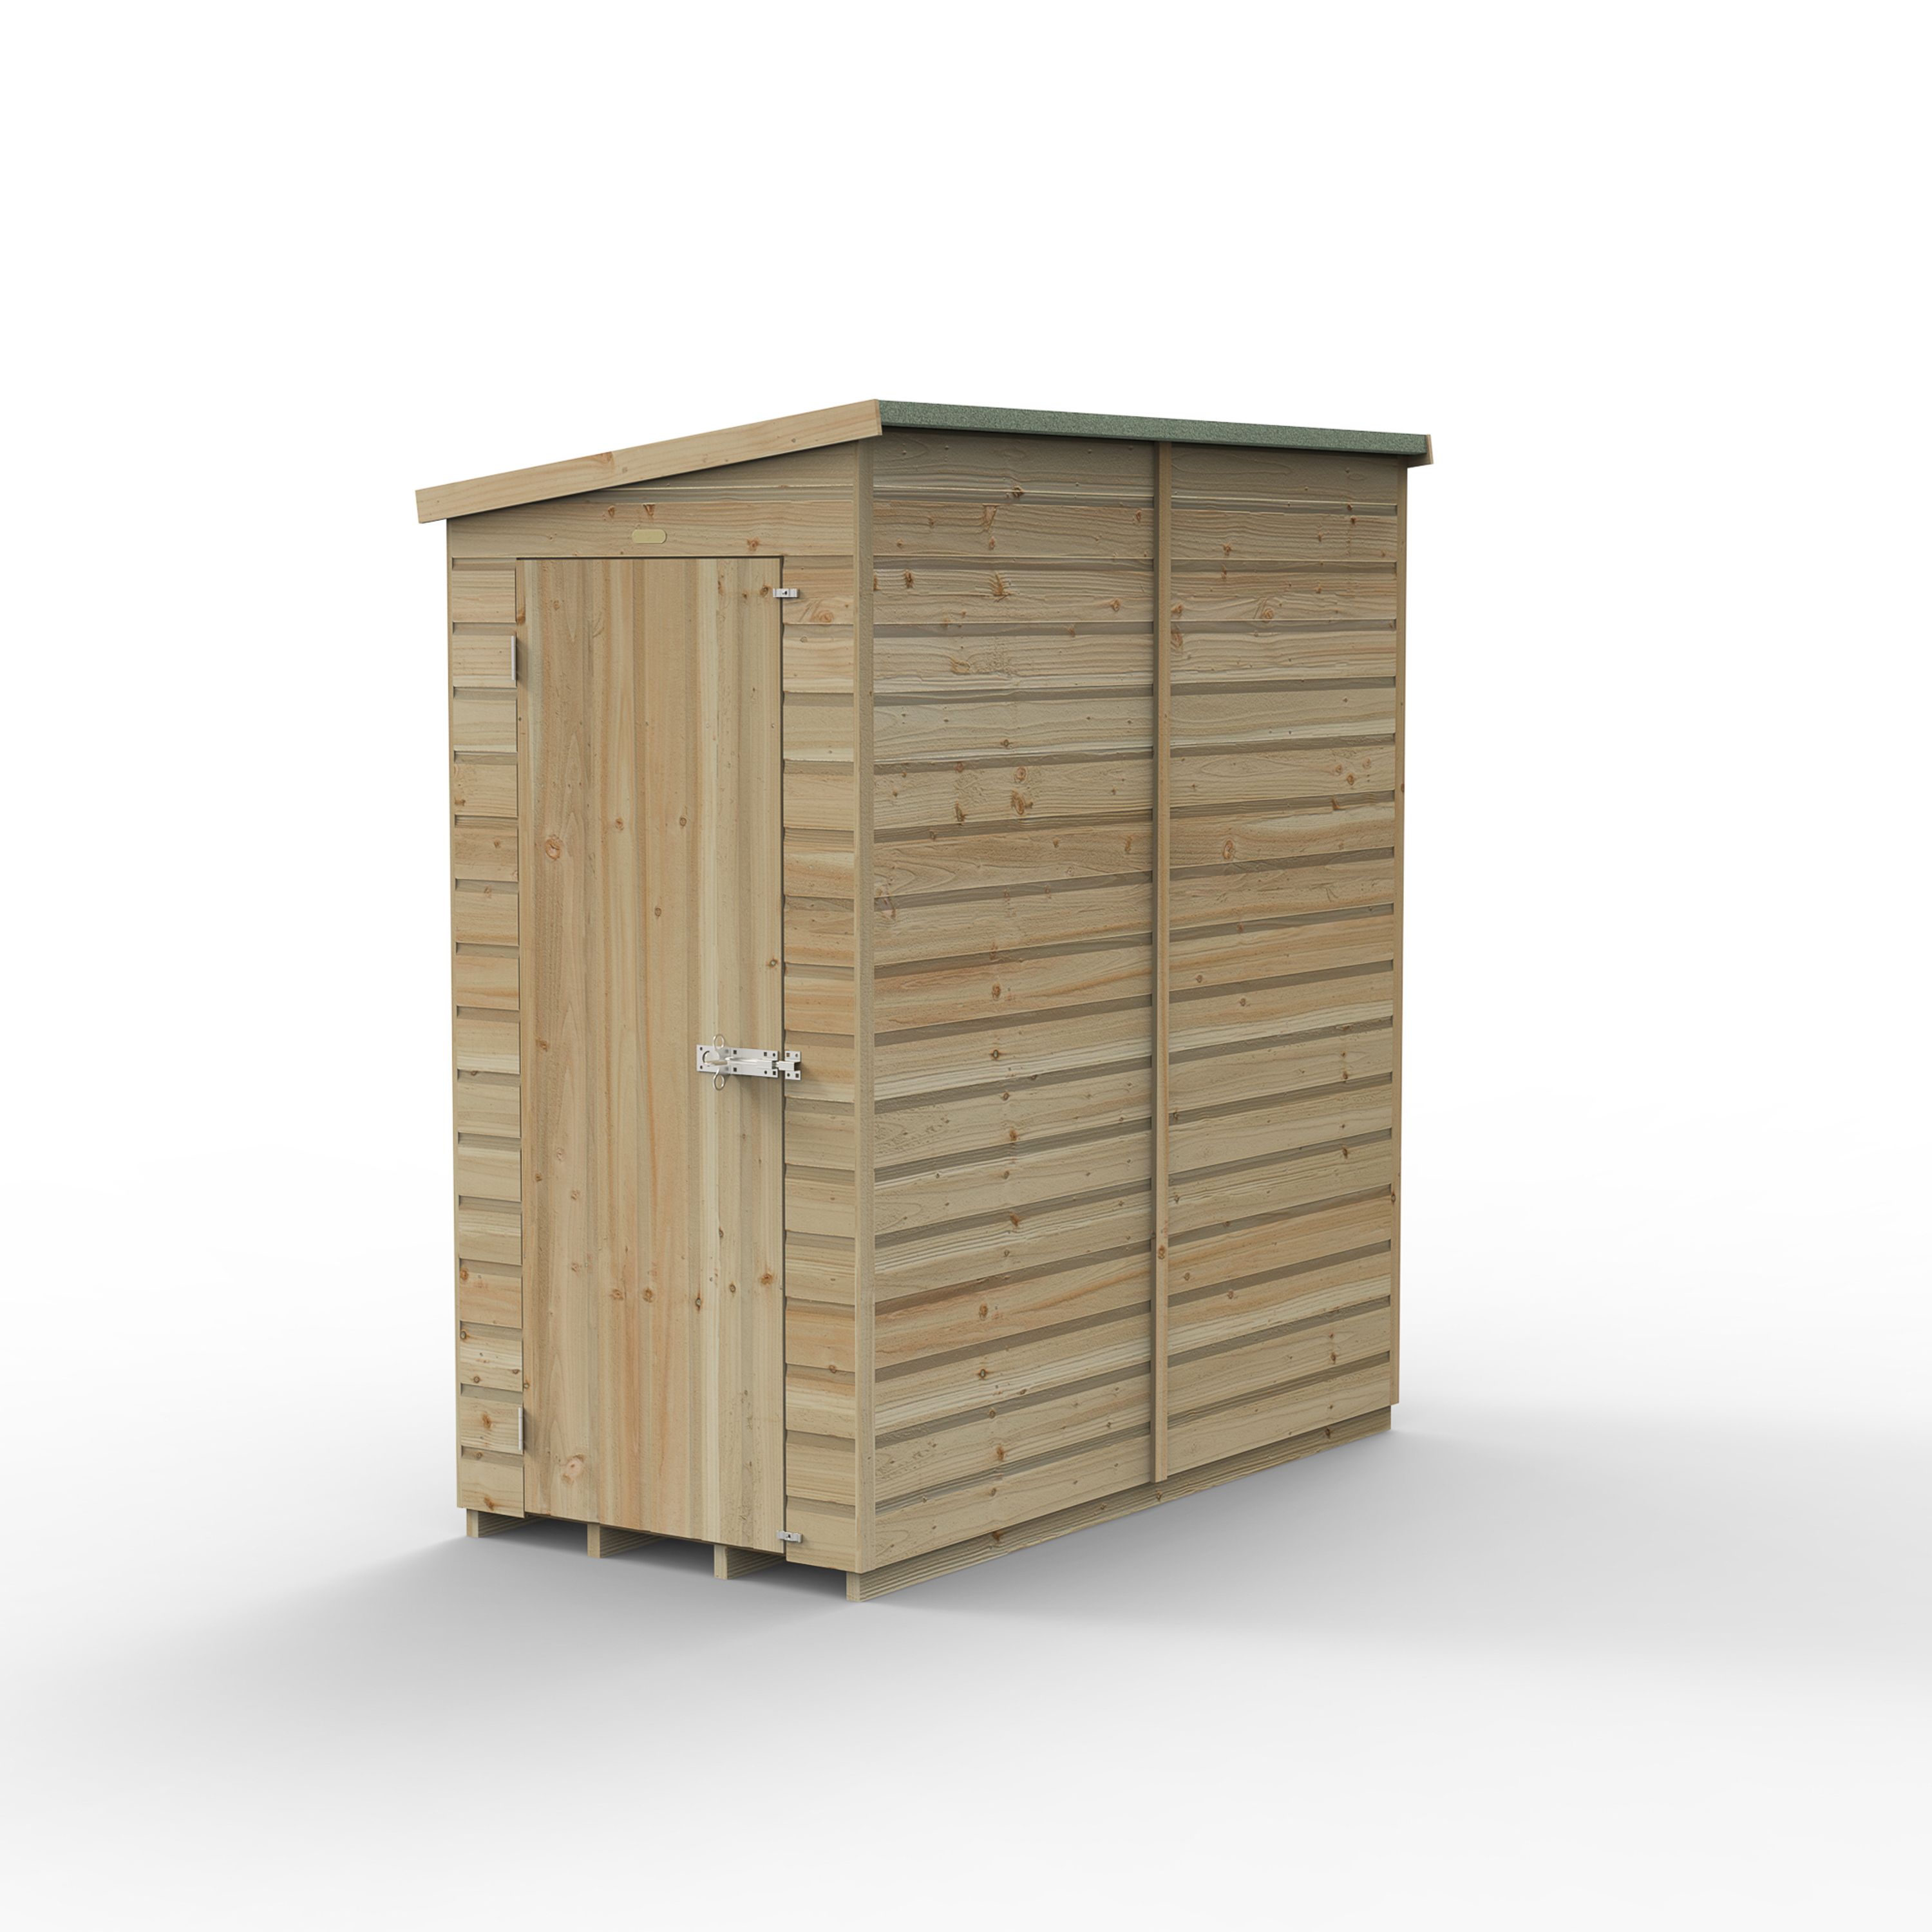 Forest Garden Beckwood 6x3 ft Pent Natural timber Wooden Shed with floor - Assembly not required